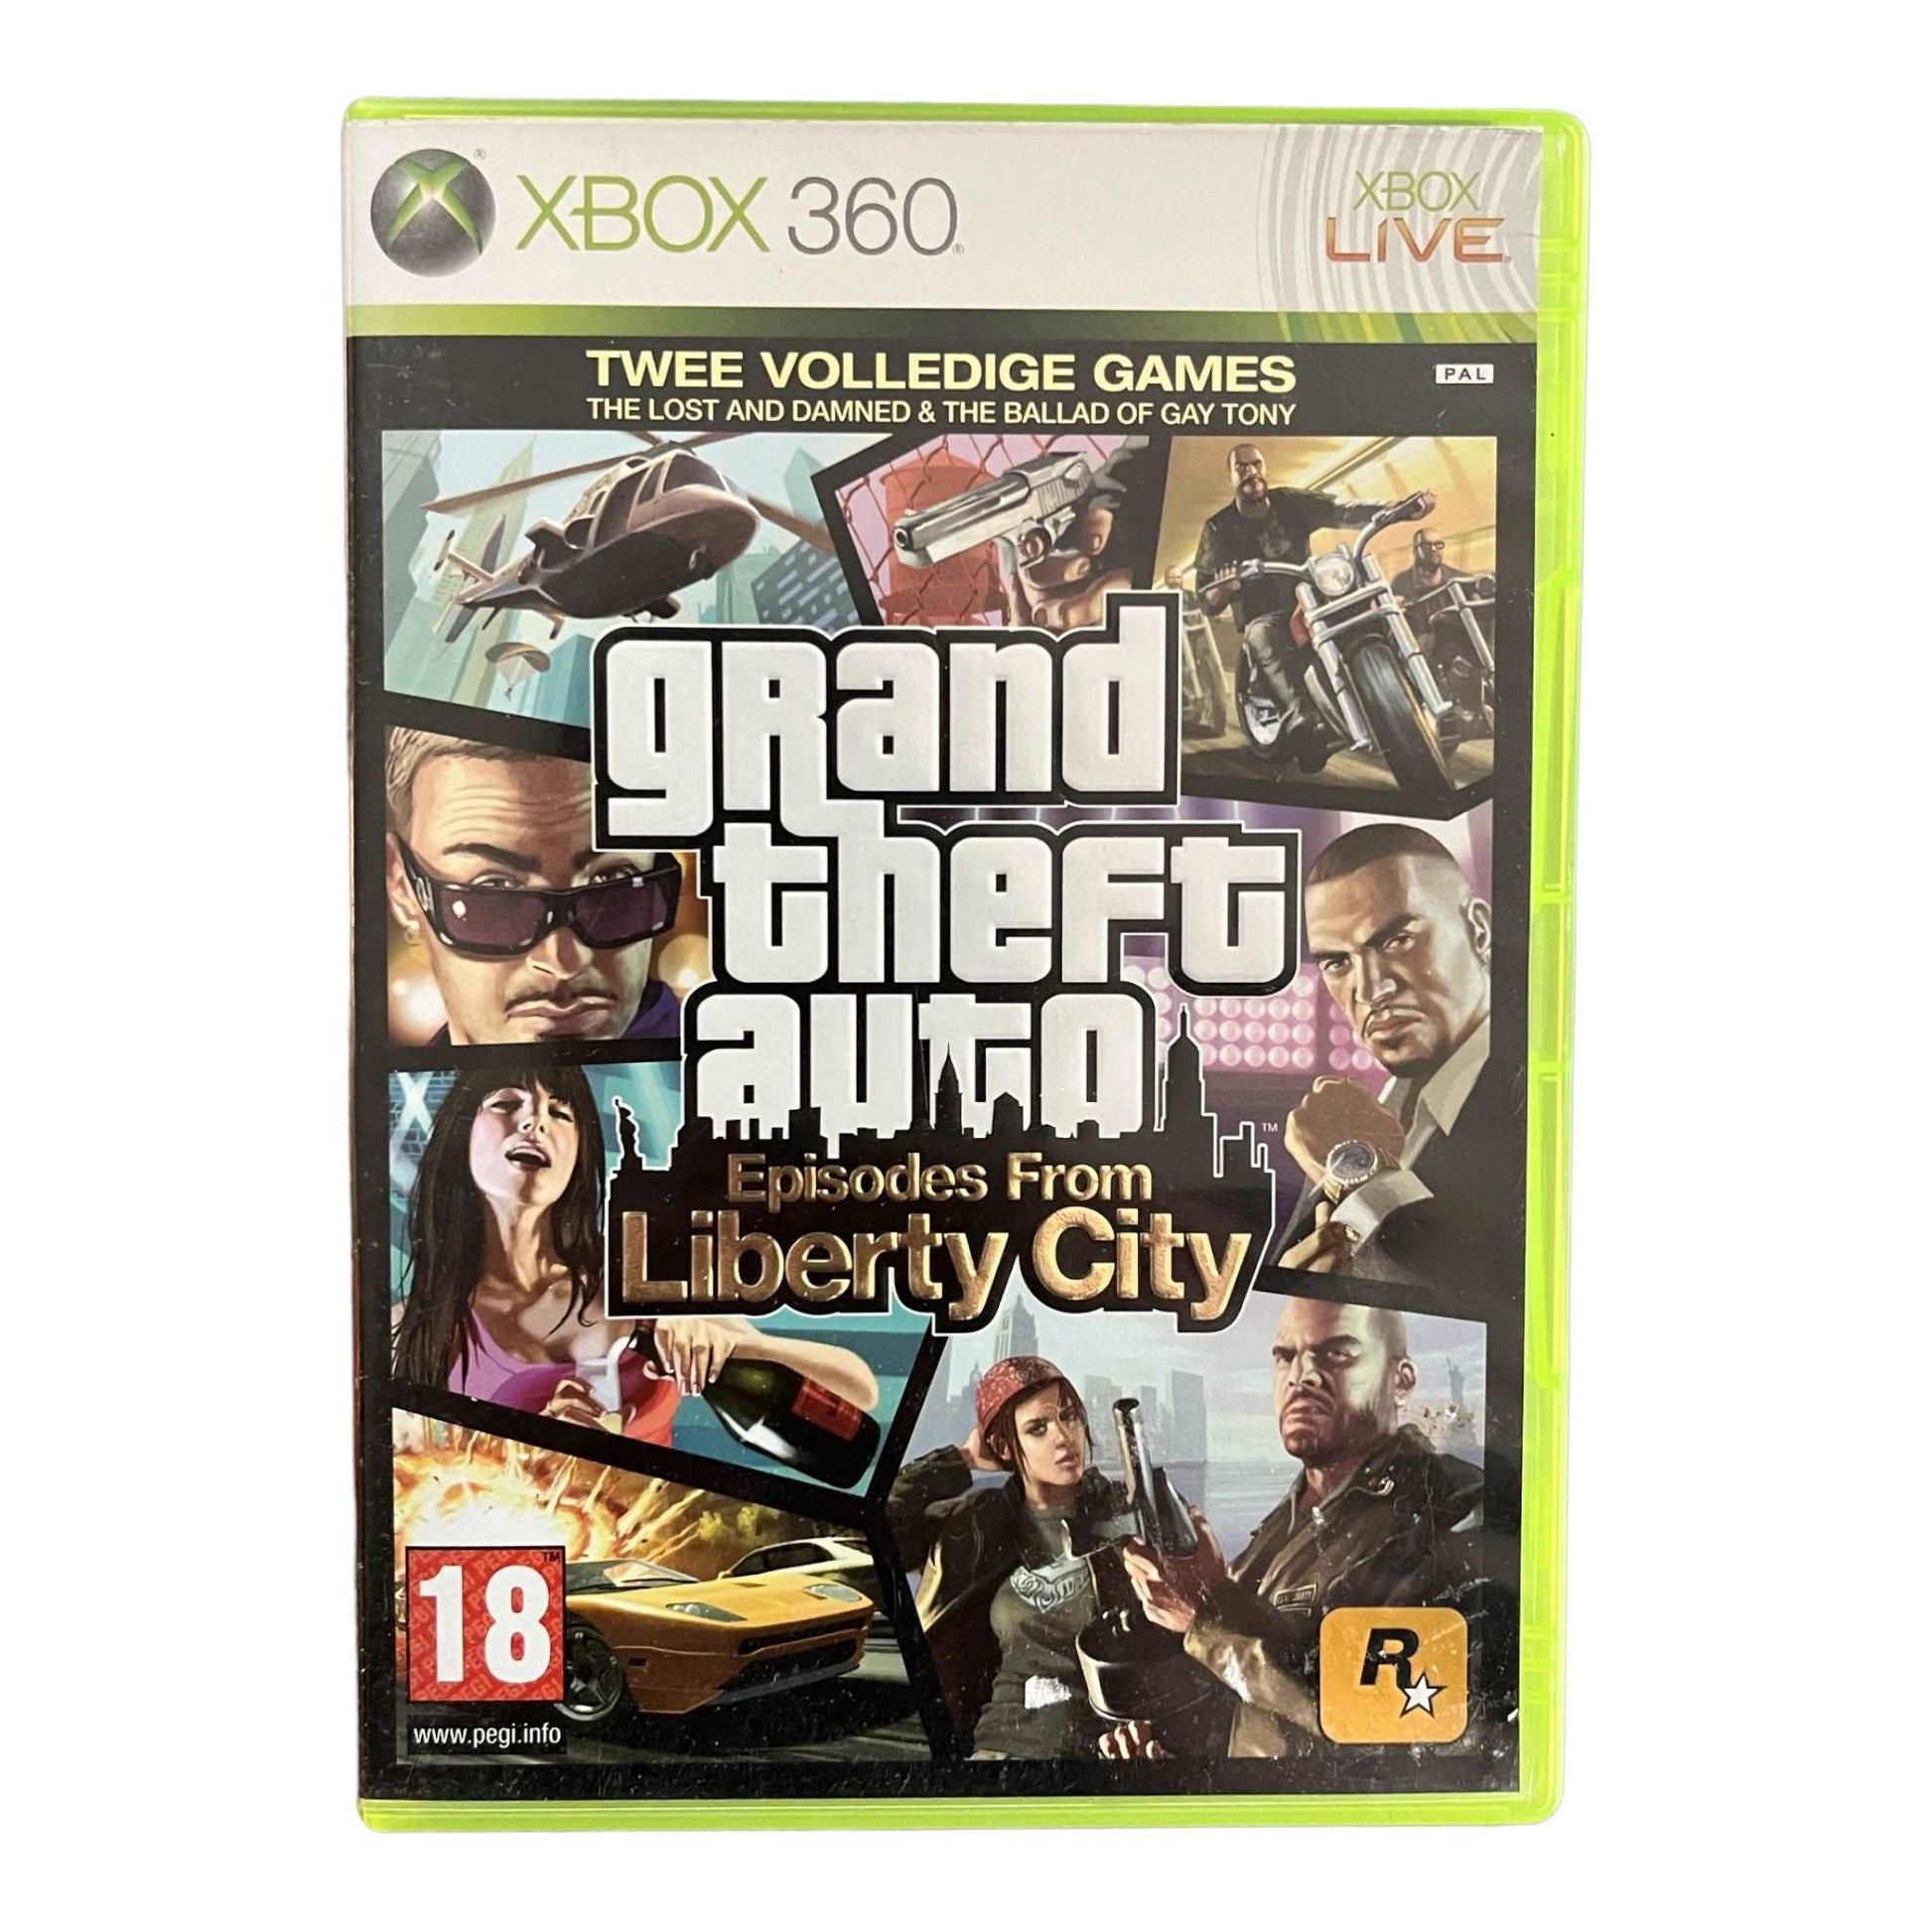 Grand Theft Auto 4 & Episodes From Liberty City - Xbox 360